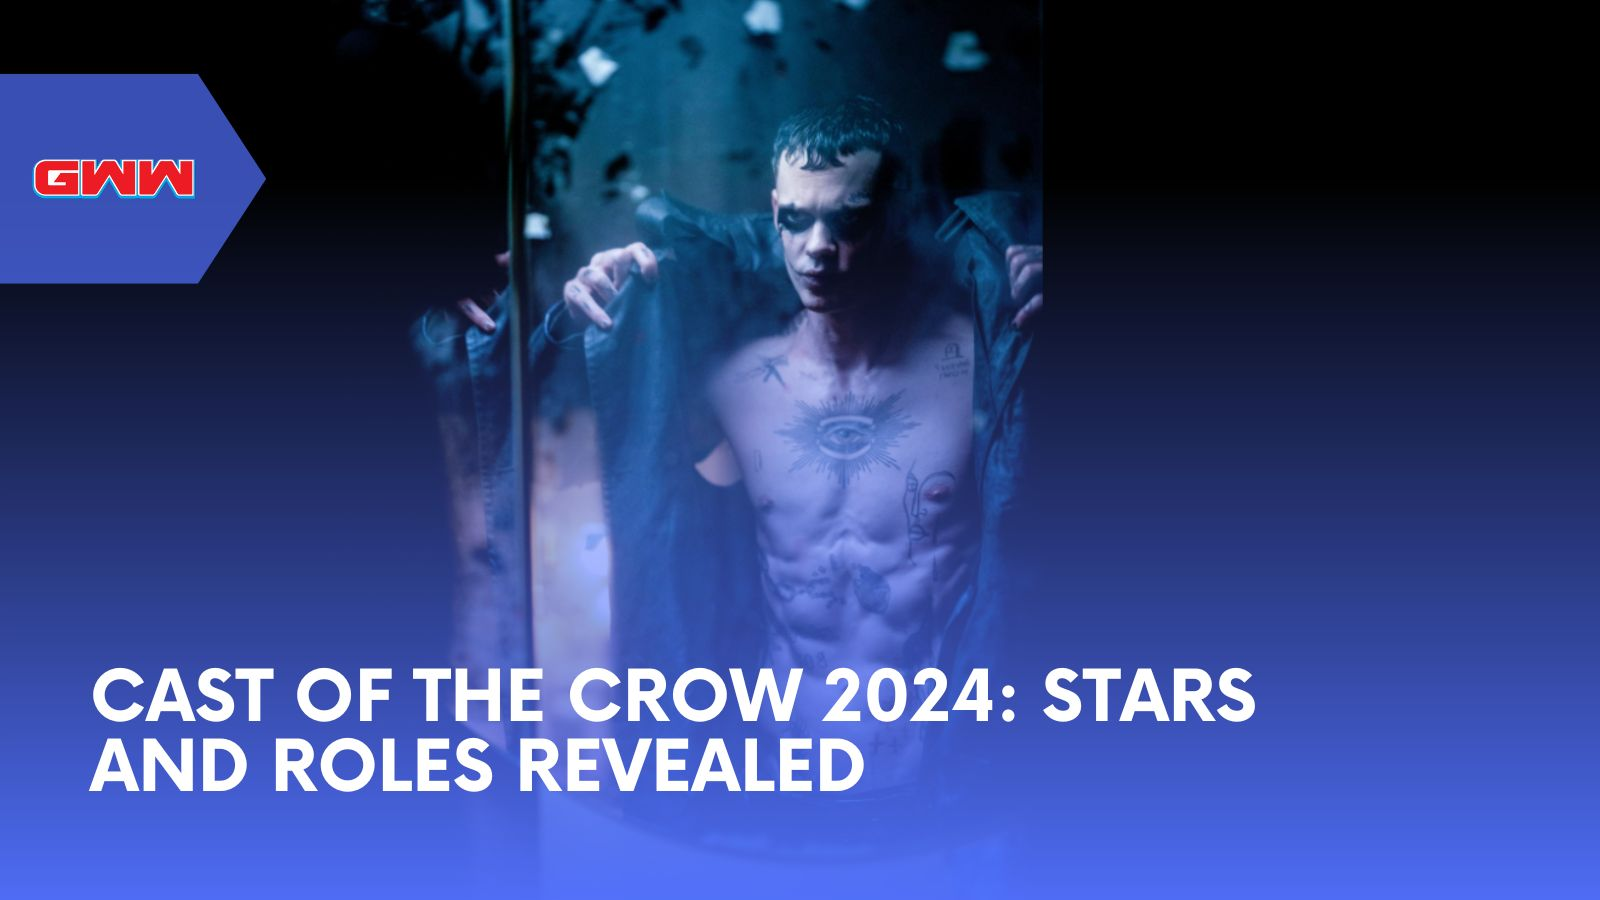 Cast of The Crow 2024: Stars and Roles Revealed